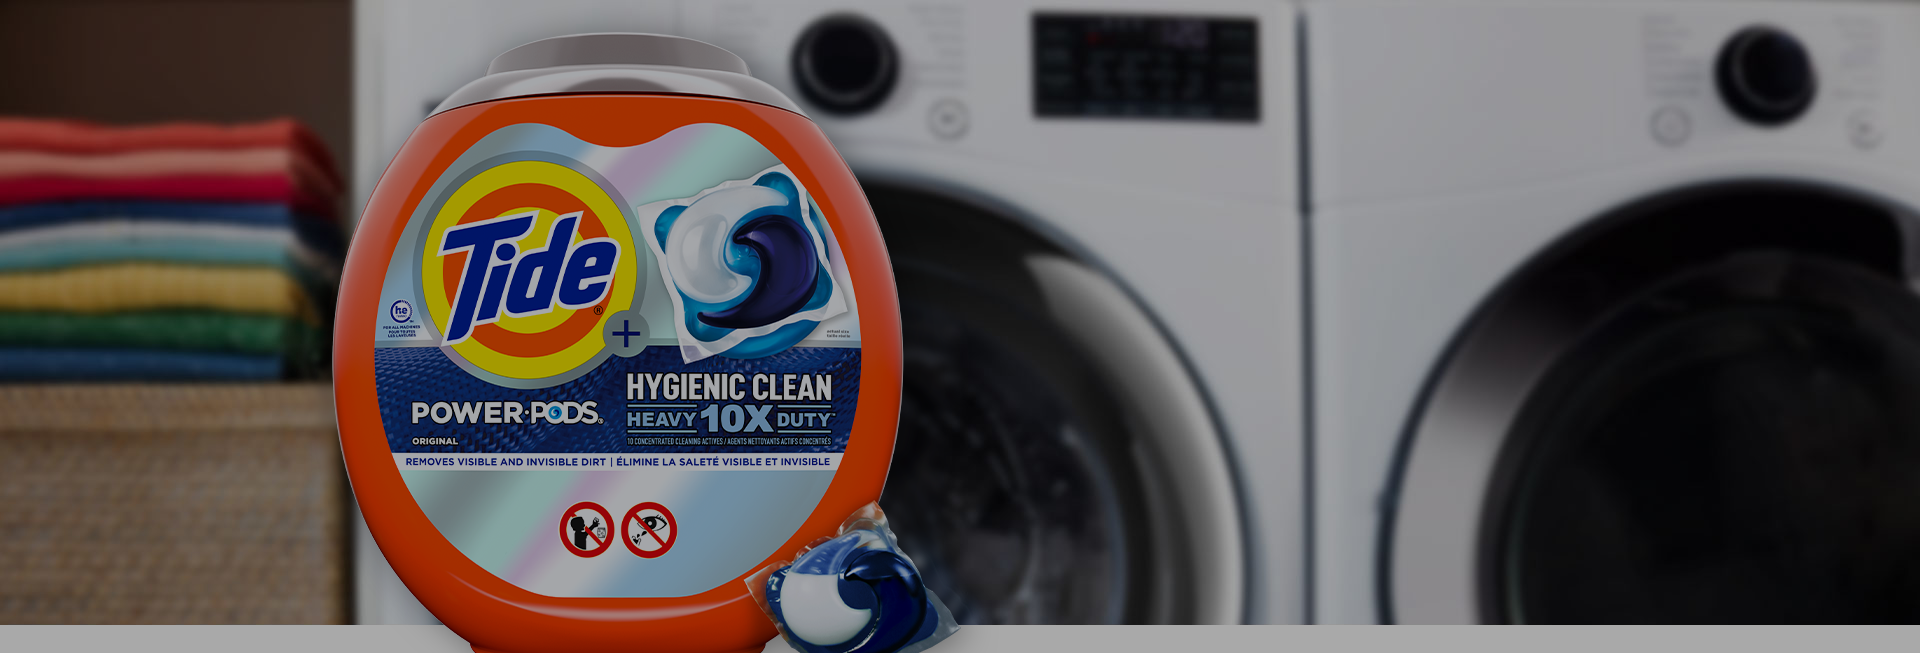 Tide Hygienic Clean Heavy Duty 10x Power PODS in fron of a washer